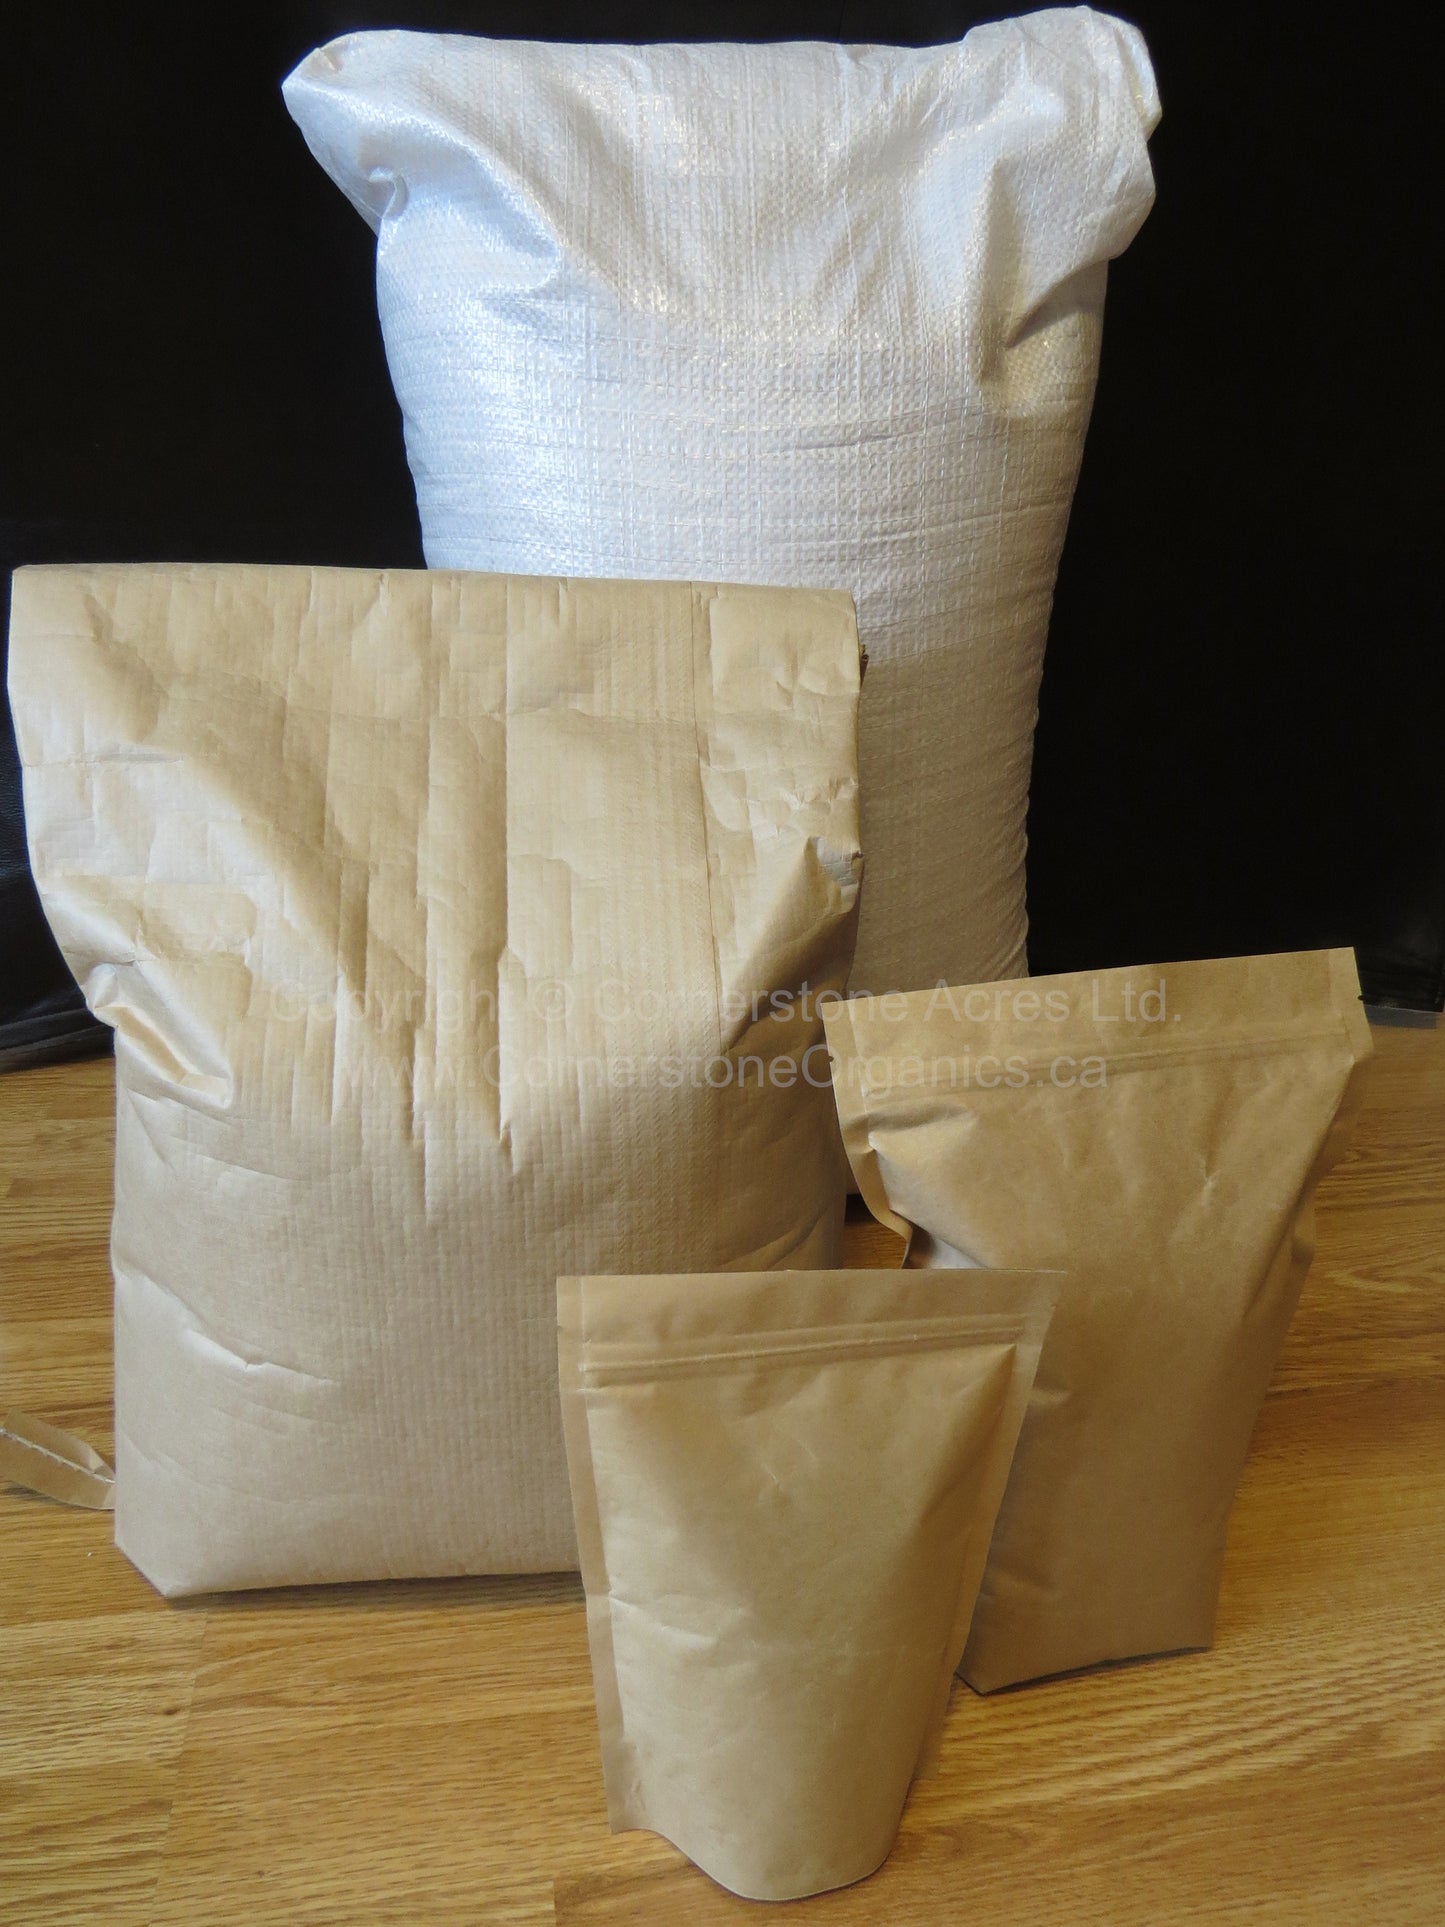 Bags of Milling Oats